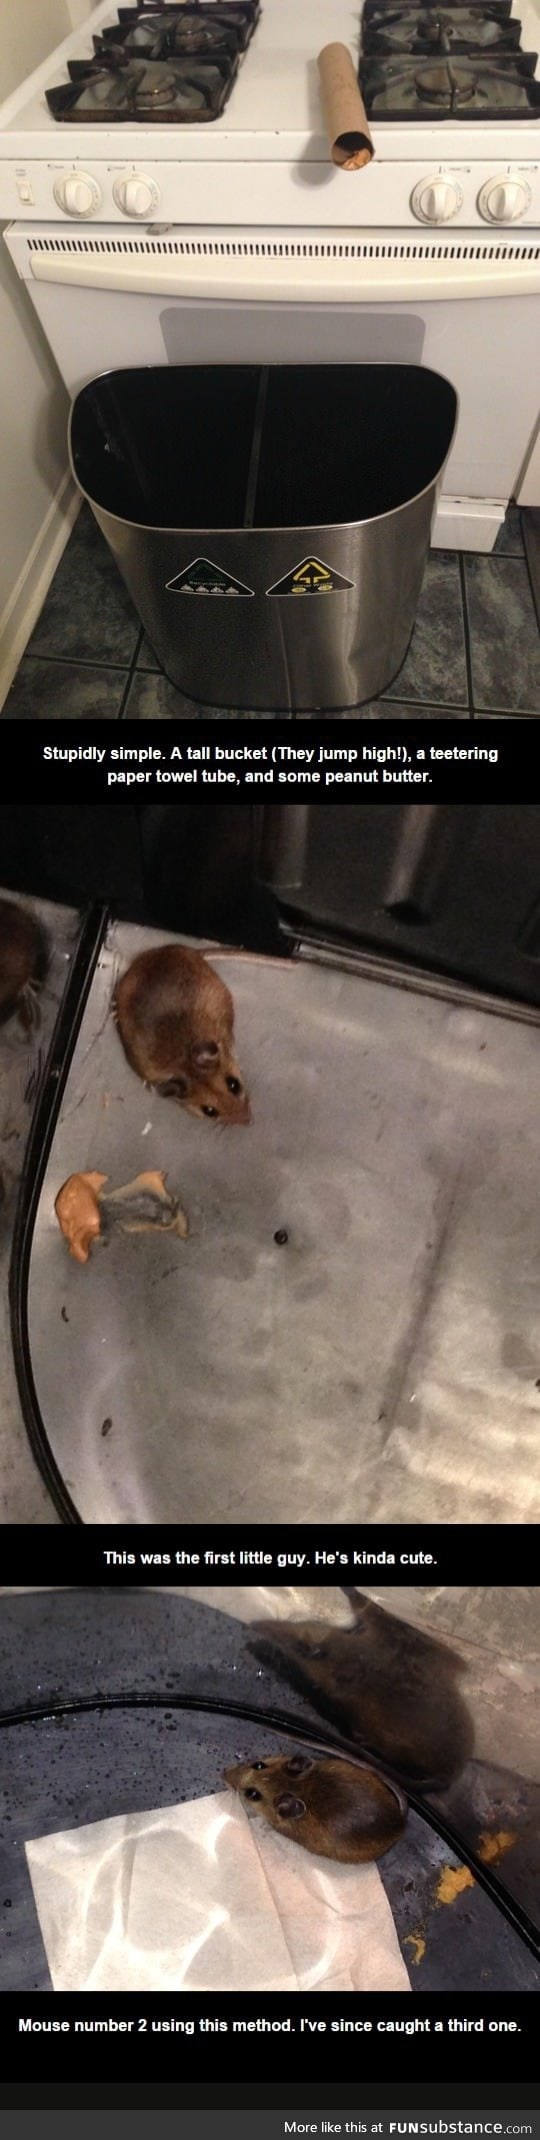 This ingeniously simple mouse trap really worked